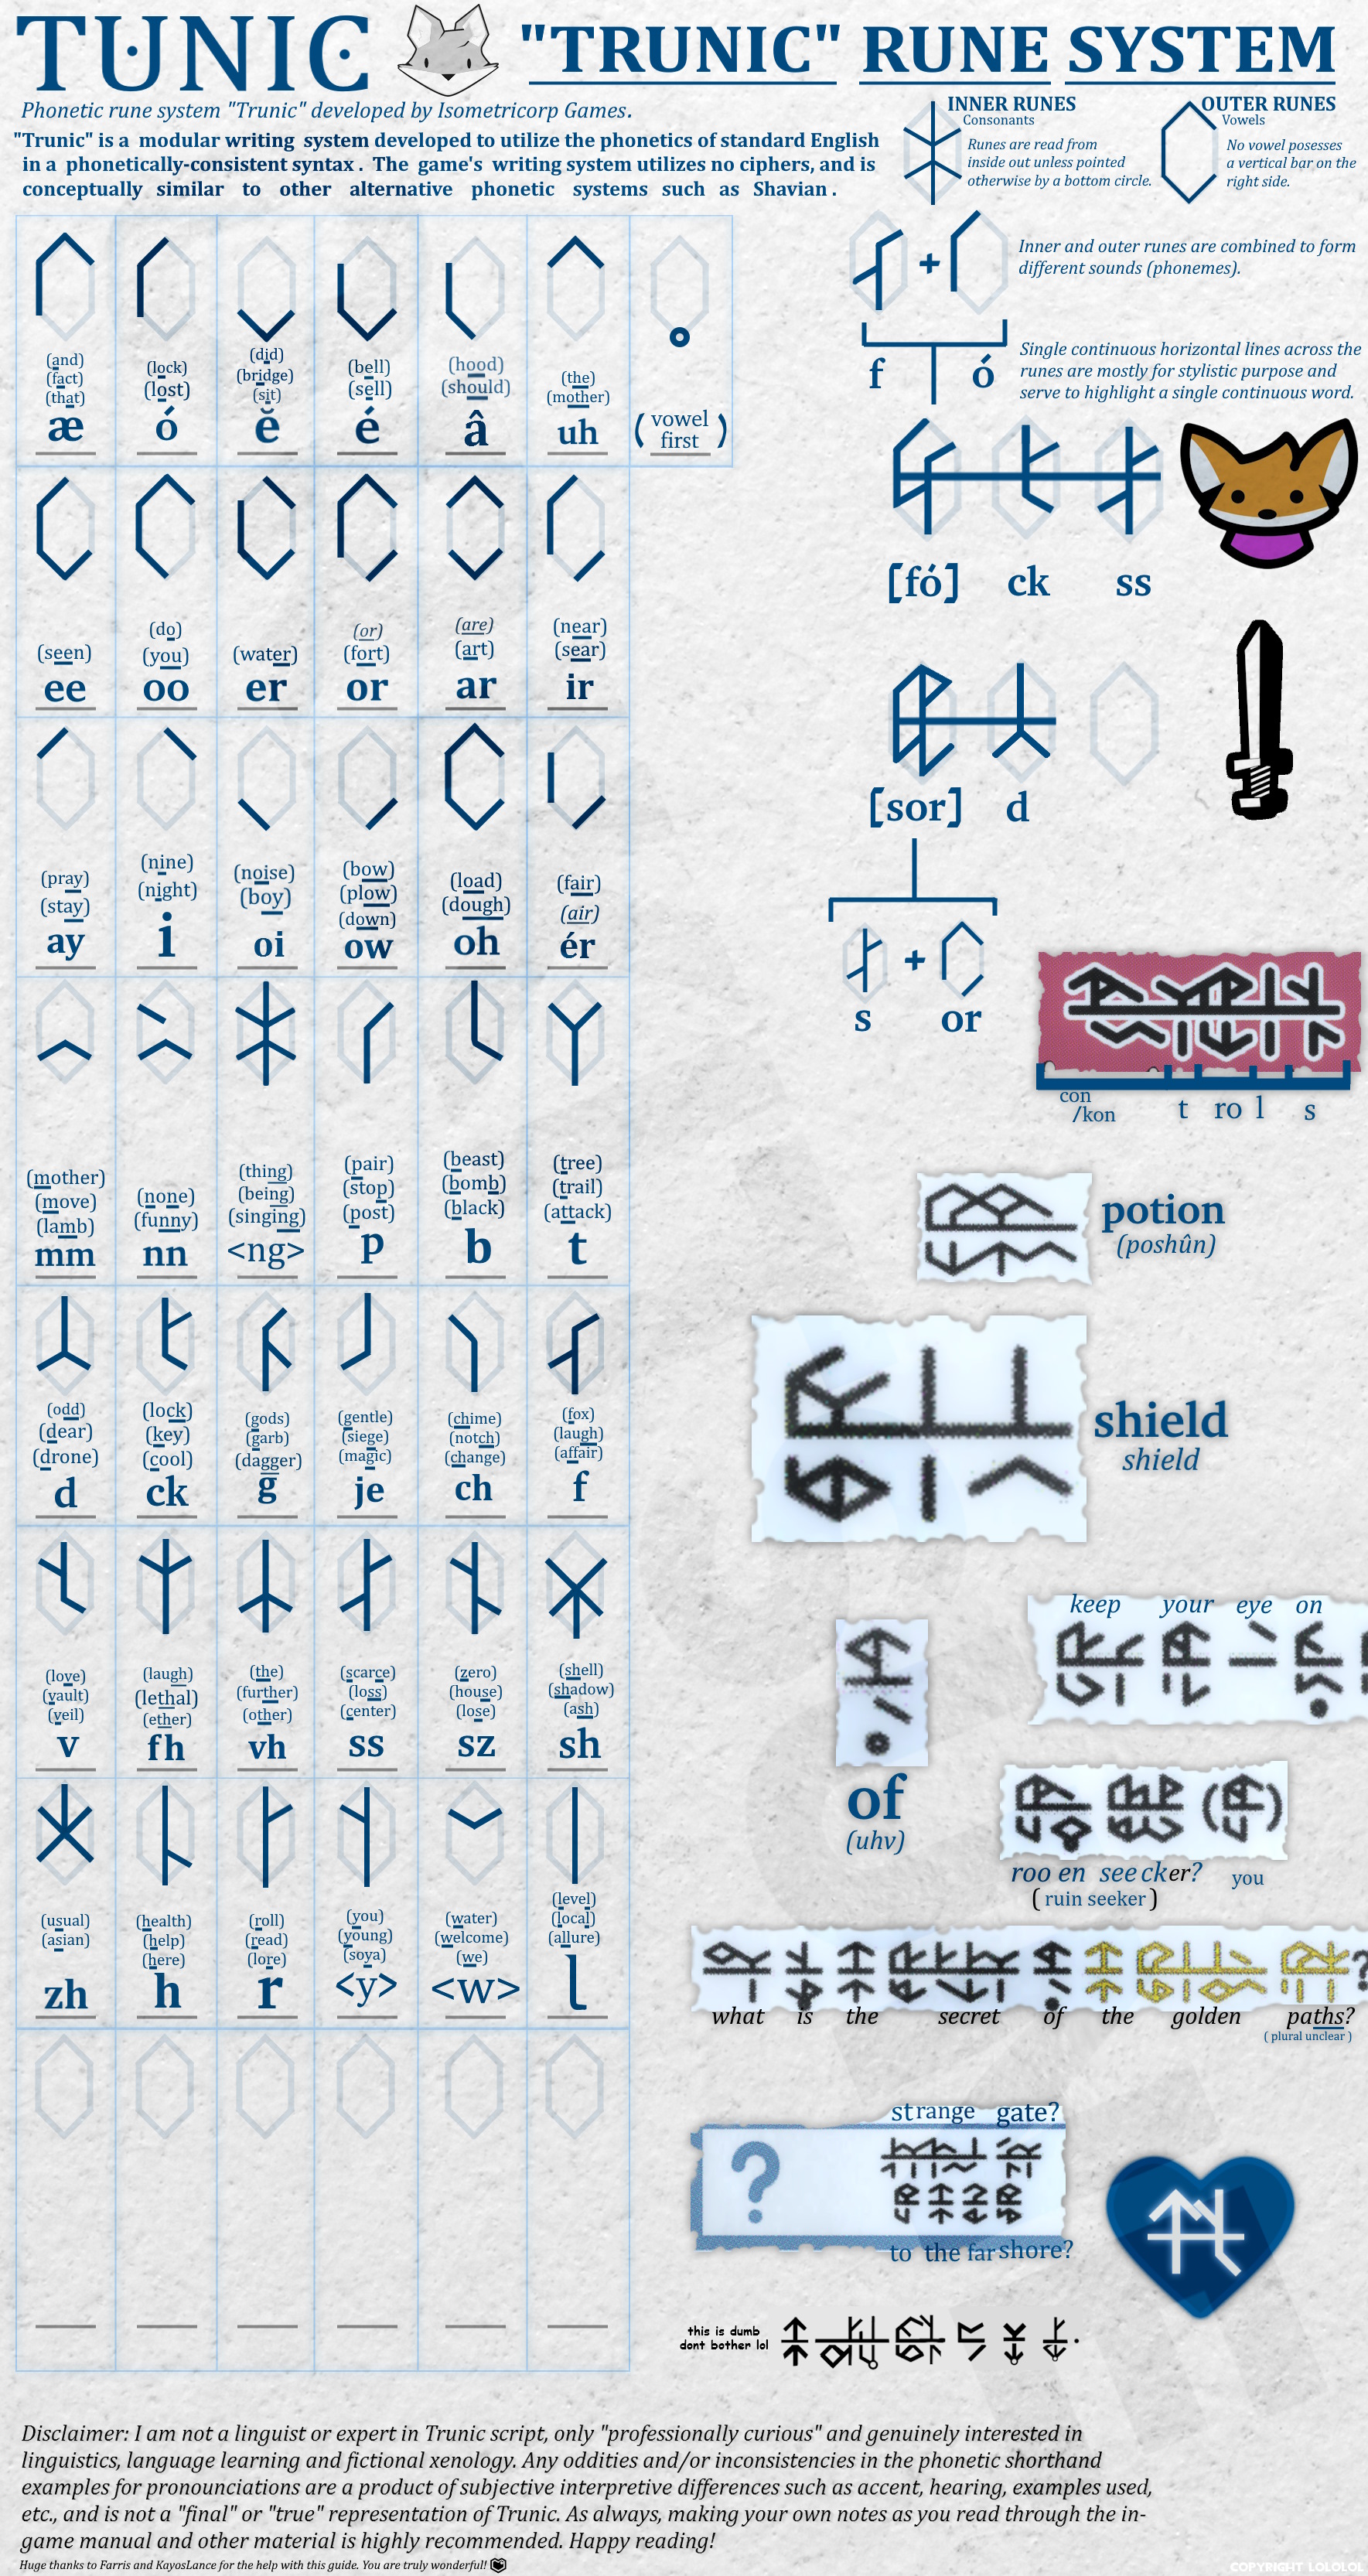 [Semi-Spoiler] Trunic Rune System - Reference for reading the ingame text image 1